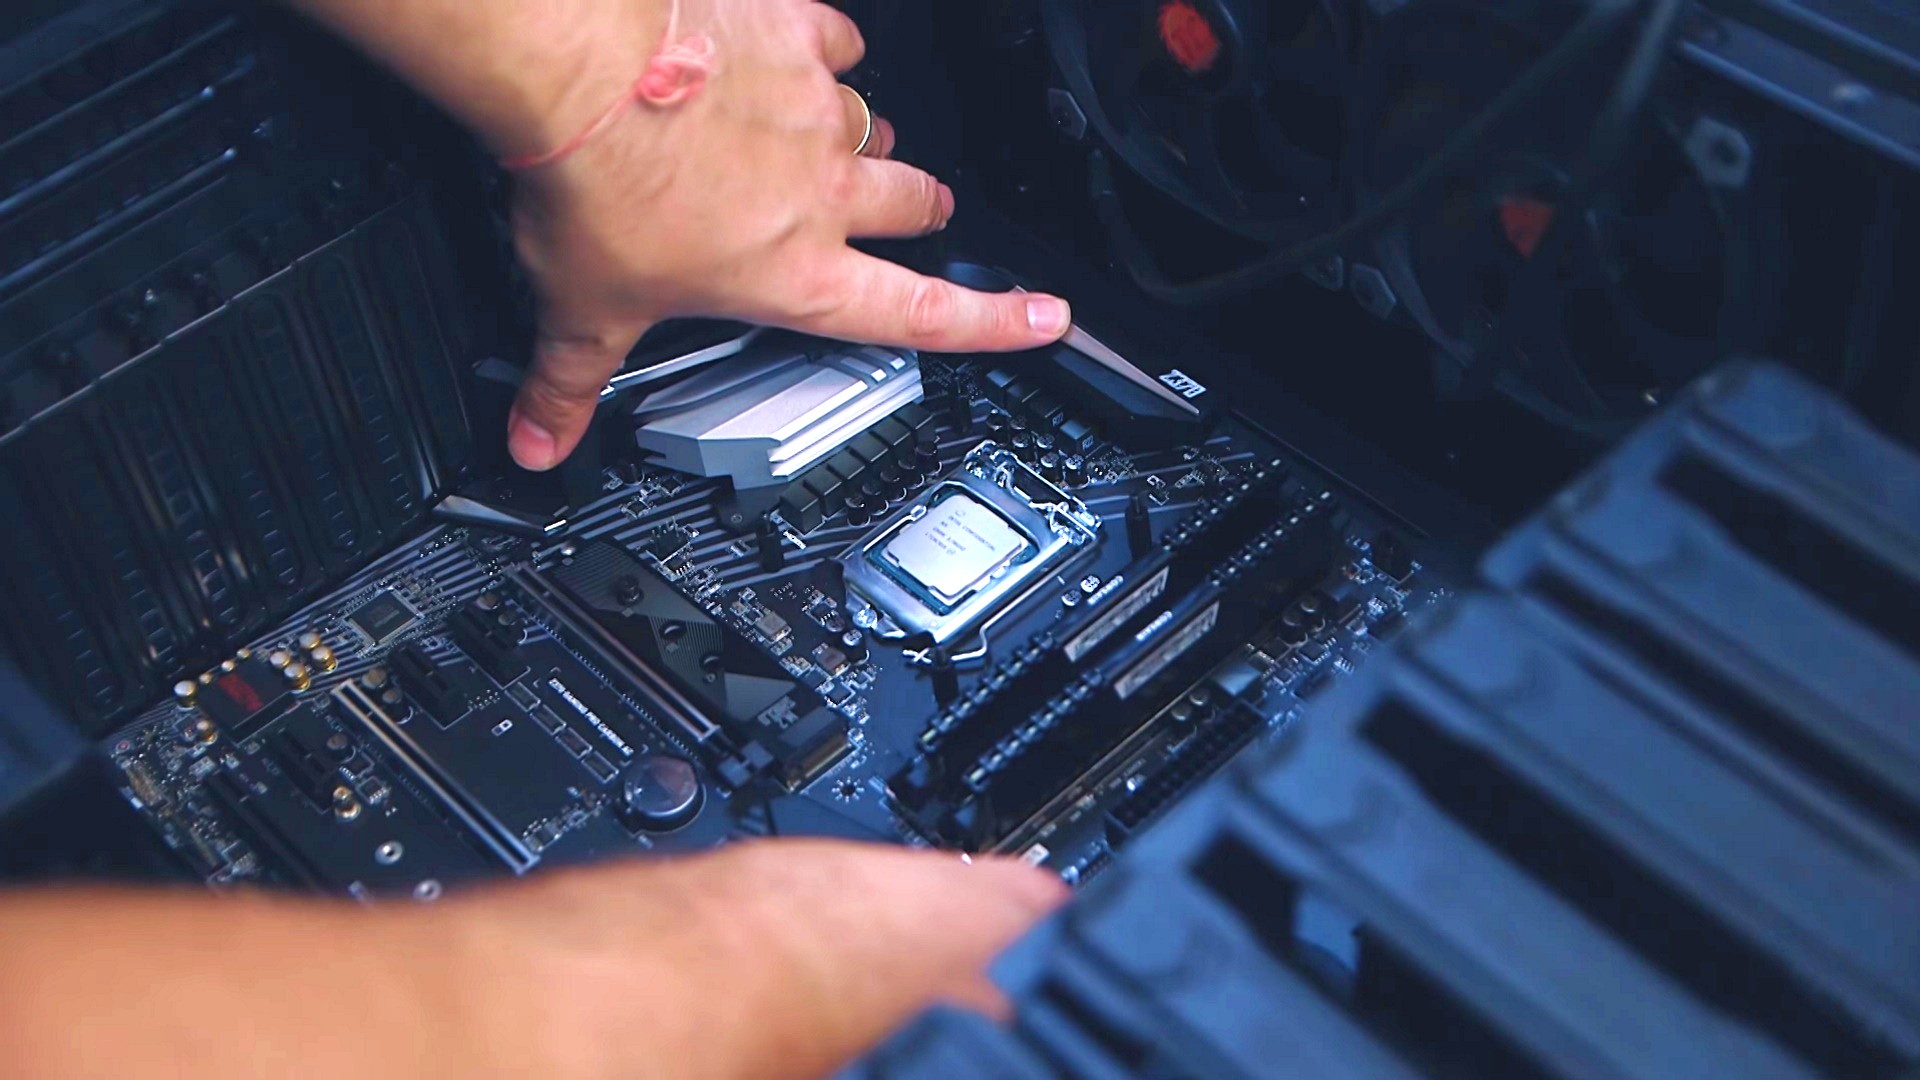 How to build a gaming PC in 2021